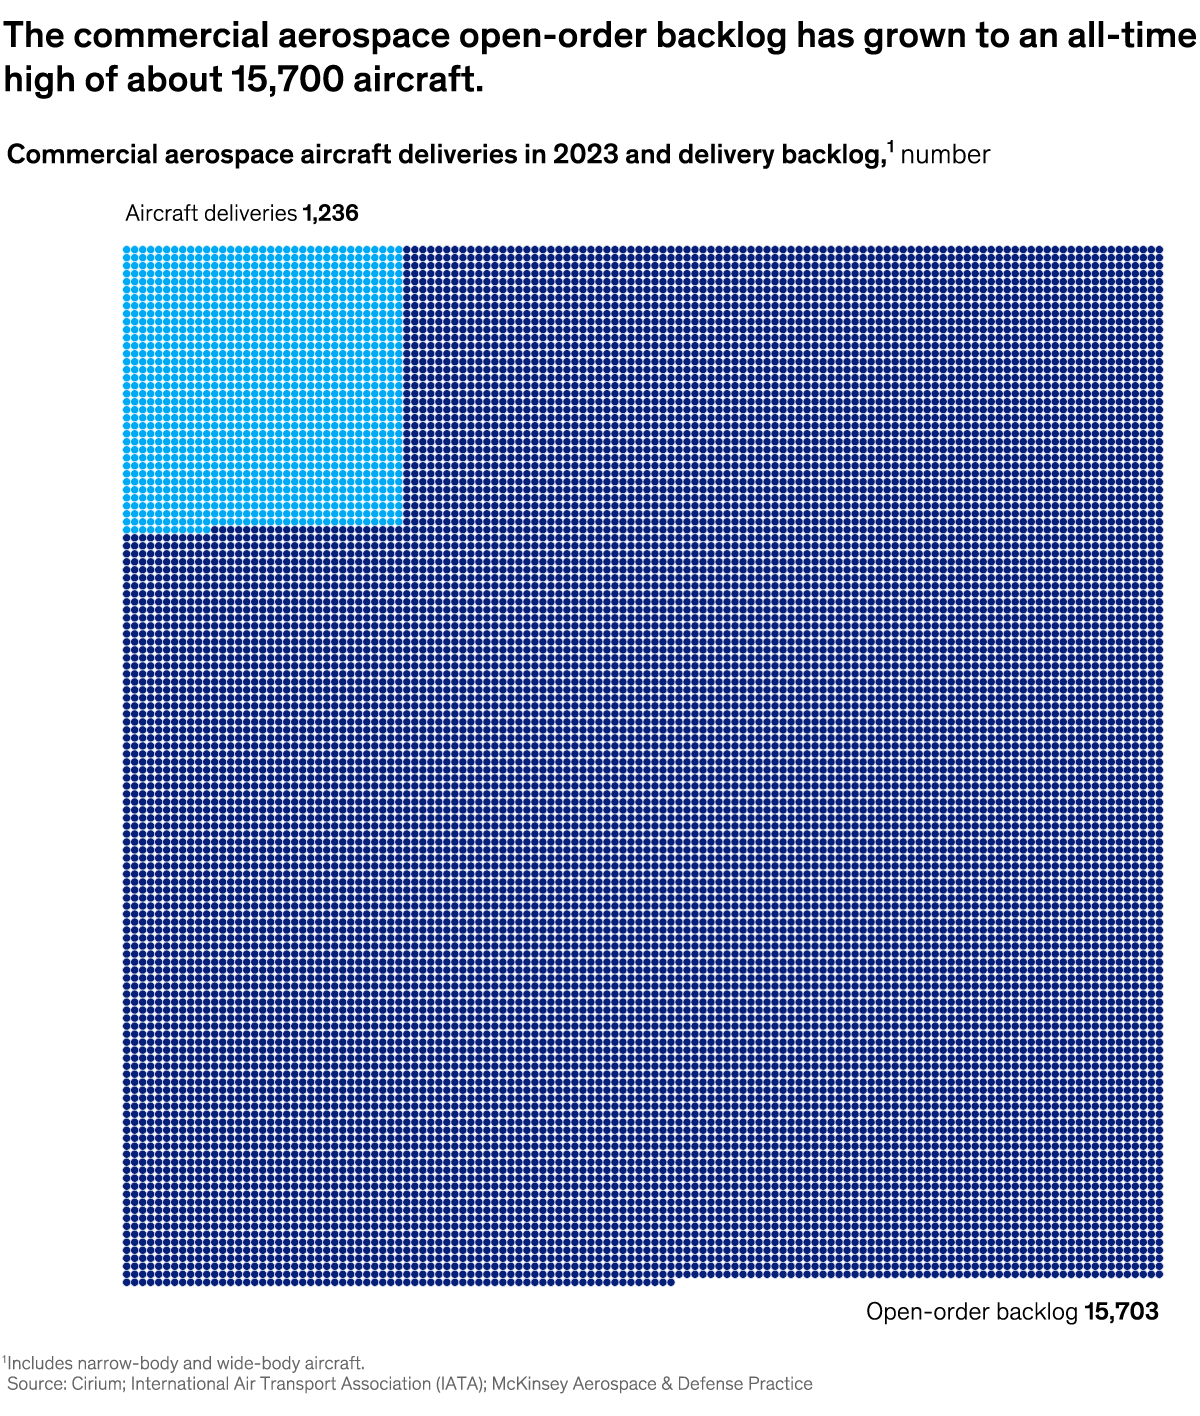 A chart titled “The commercial aerospace open-order backlog has grown to an all-time high of about 15,700 aircraft.” Click to open the full article on McKinsey.com.